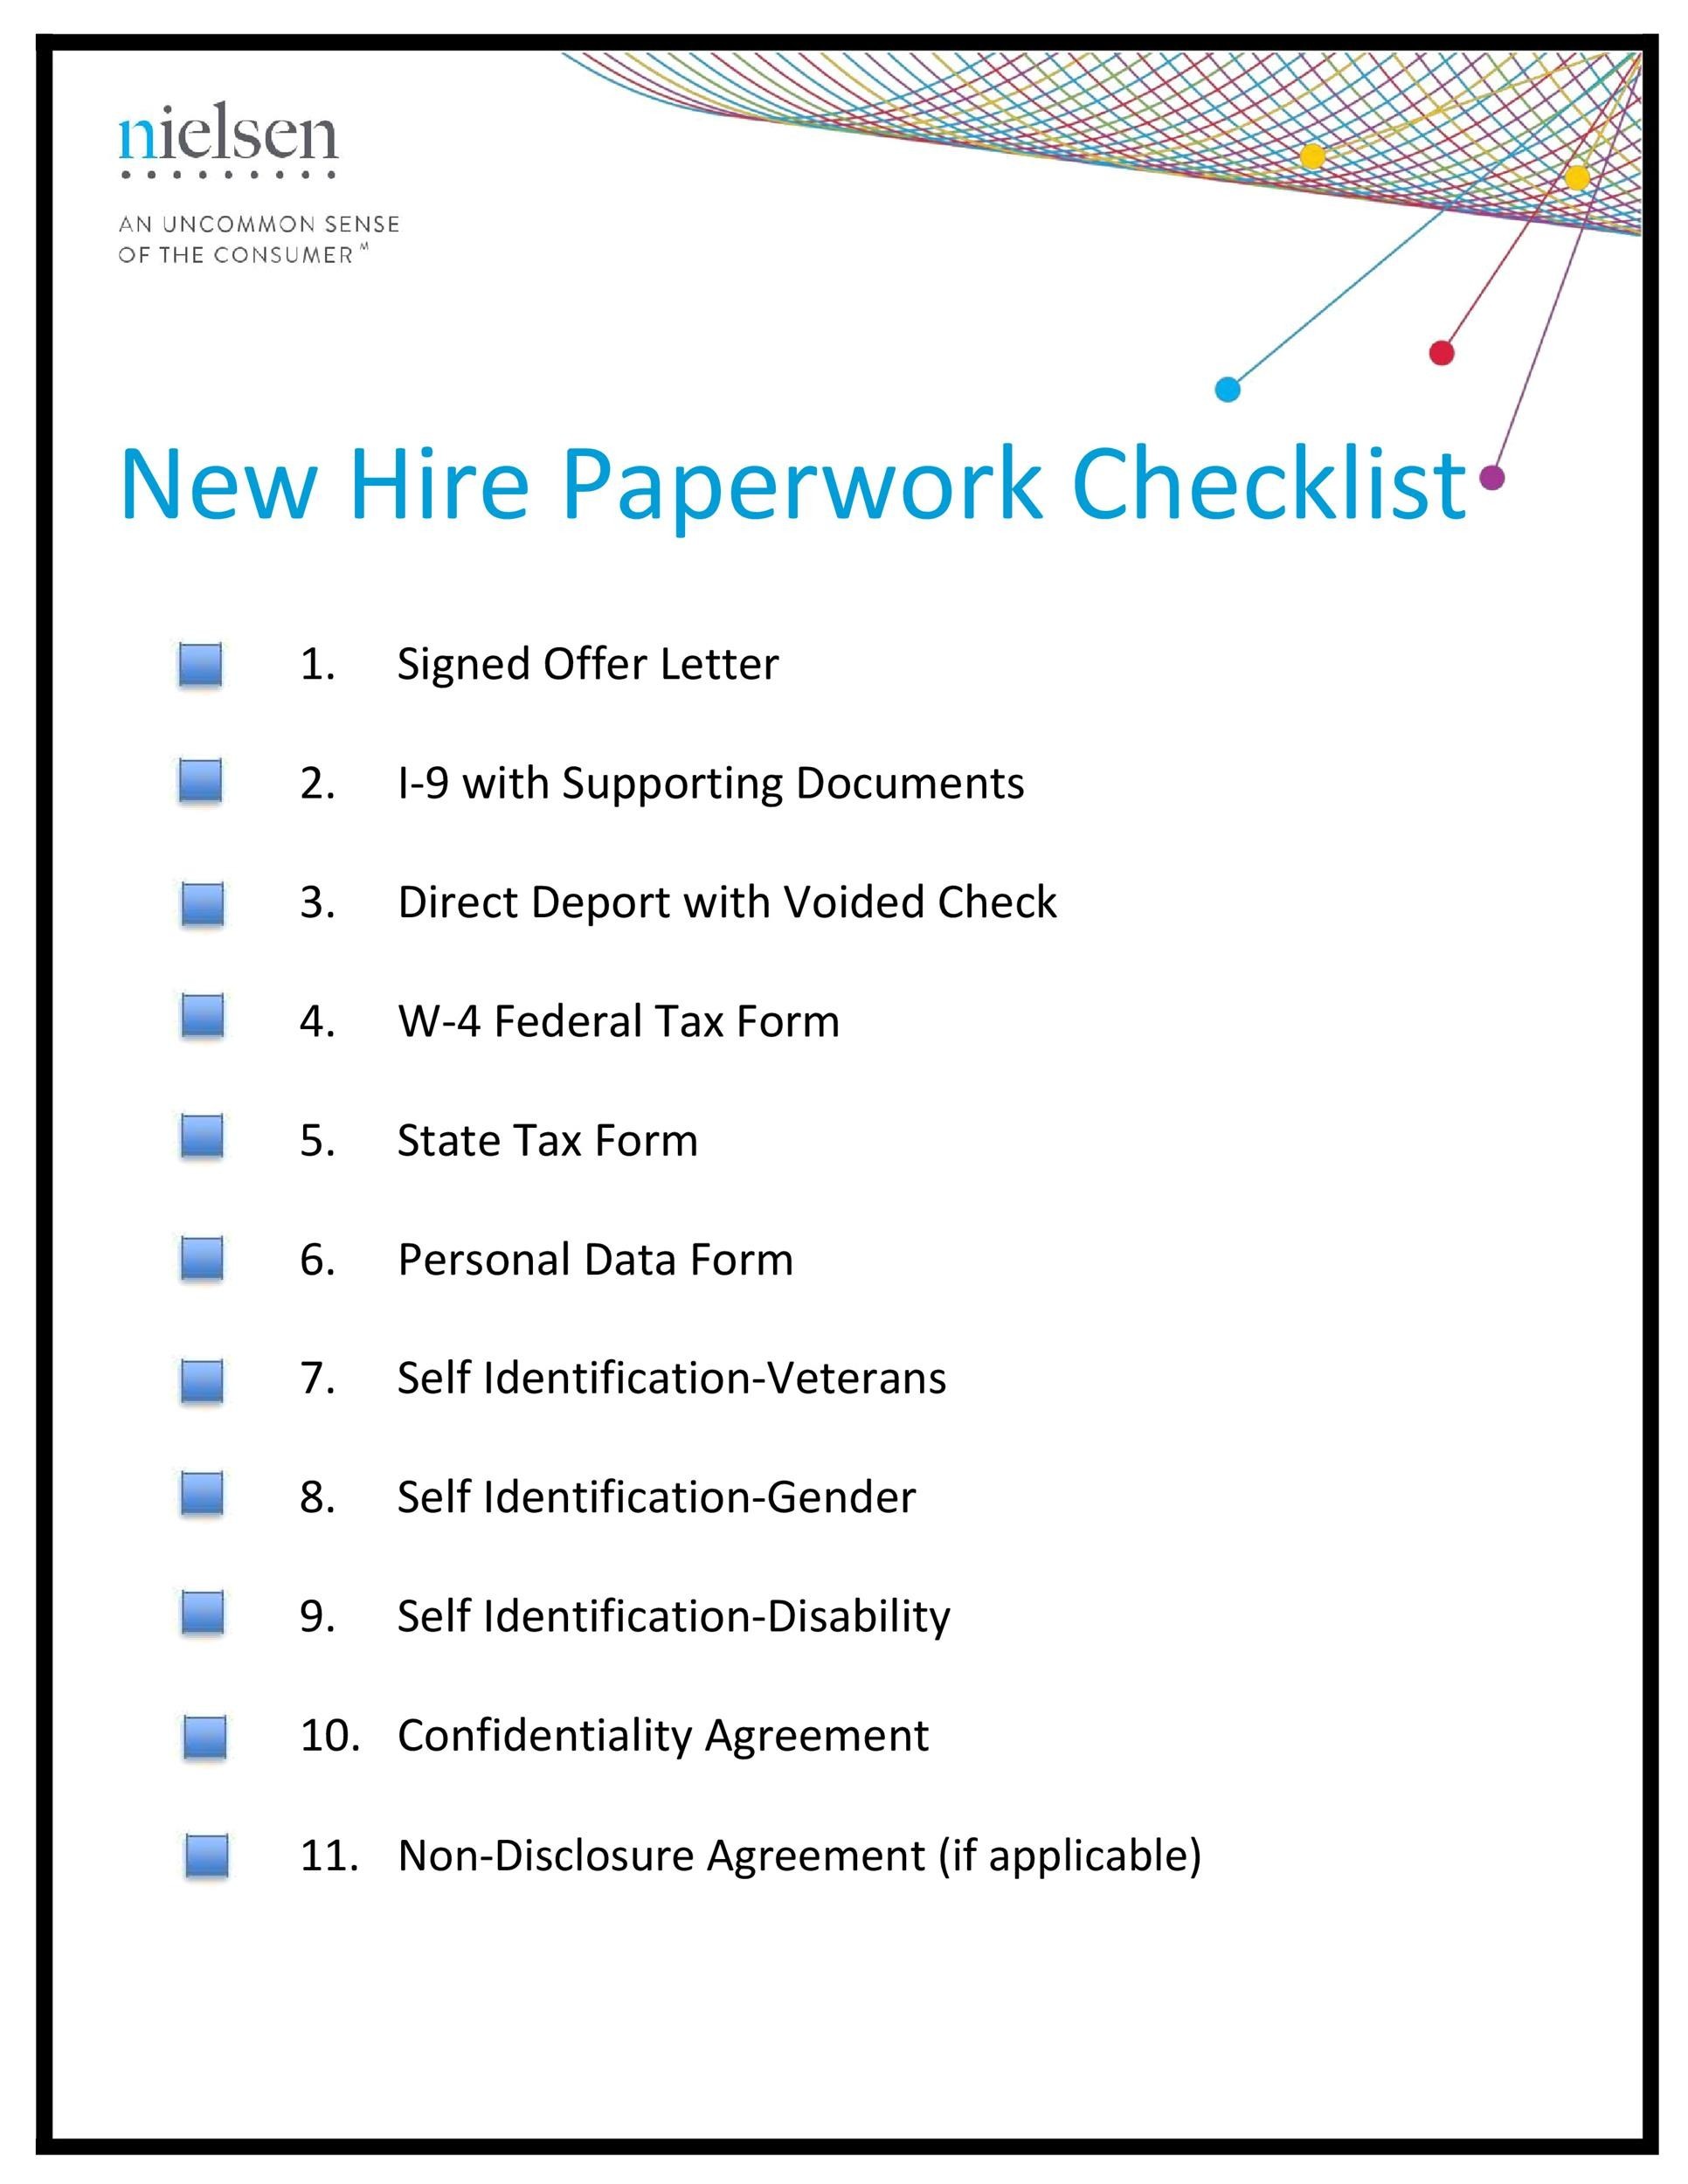 10 New Employee Checklist Template Free Sample Example Format Vrogue